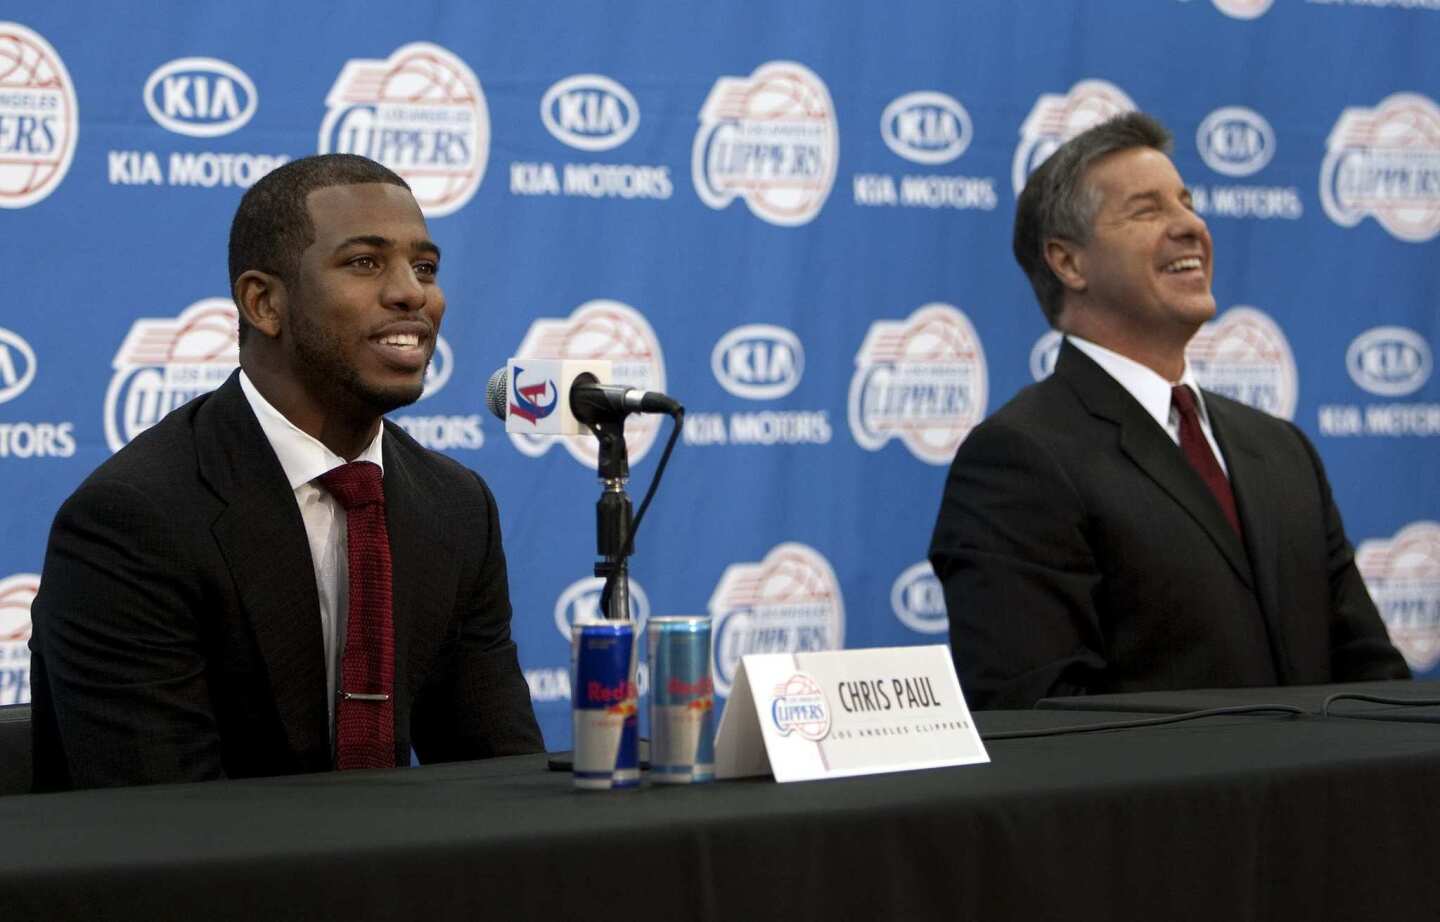 Chris Paul introduced by Clippers